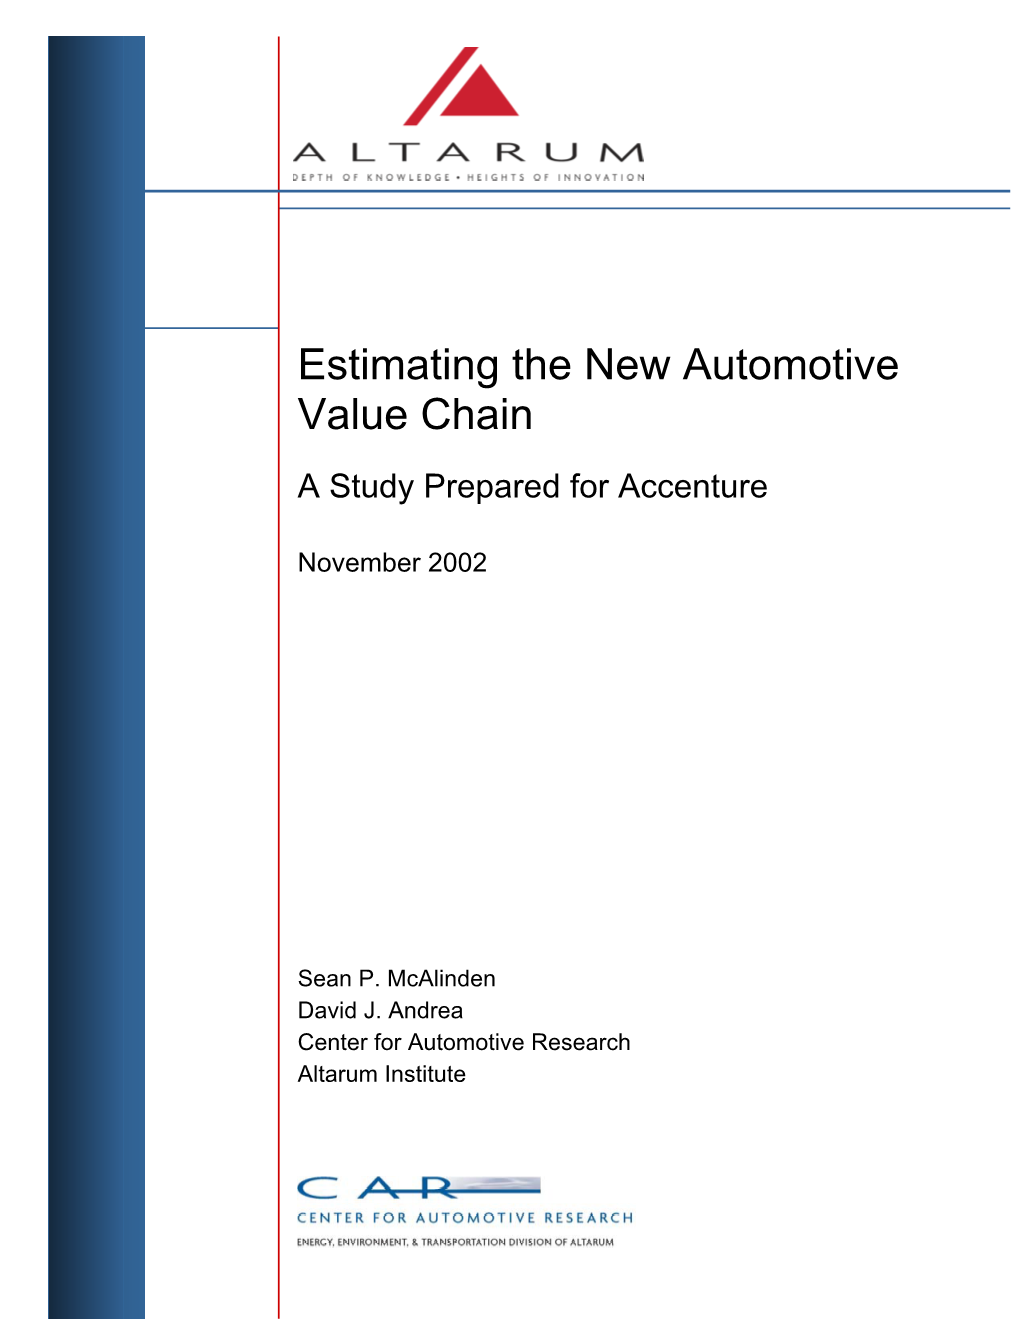 Estimating the New Automotive Value Chain